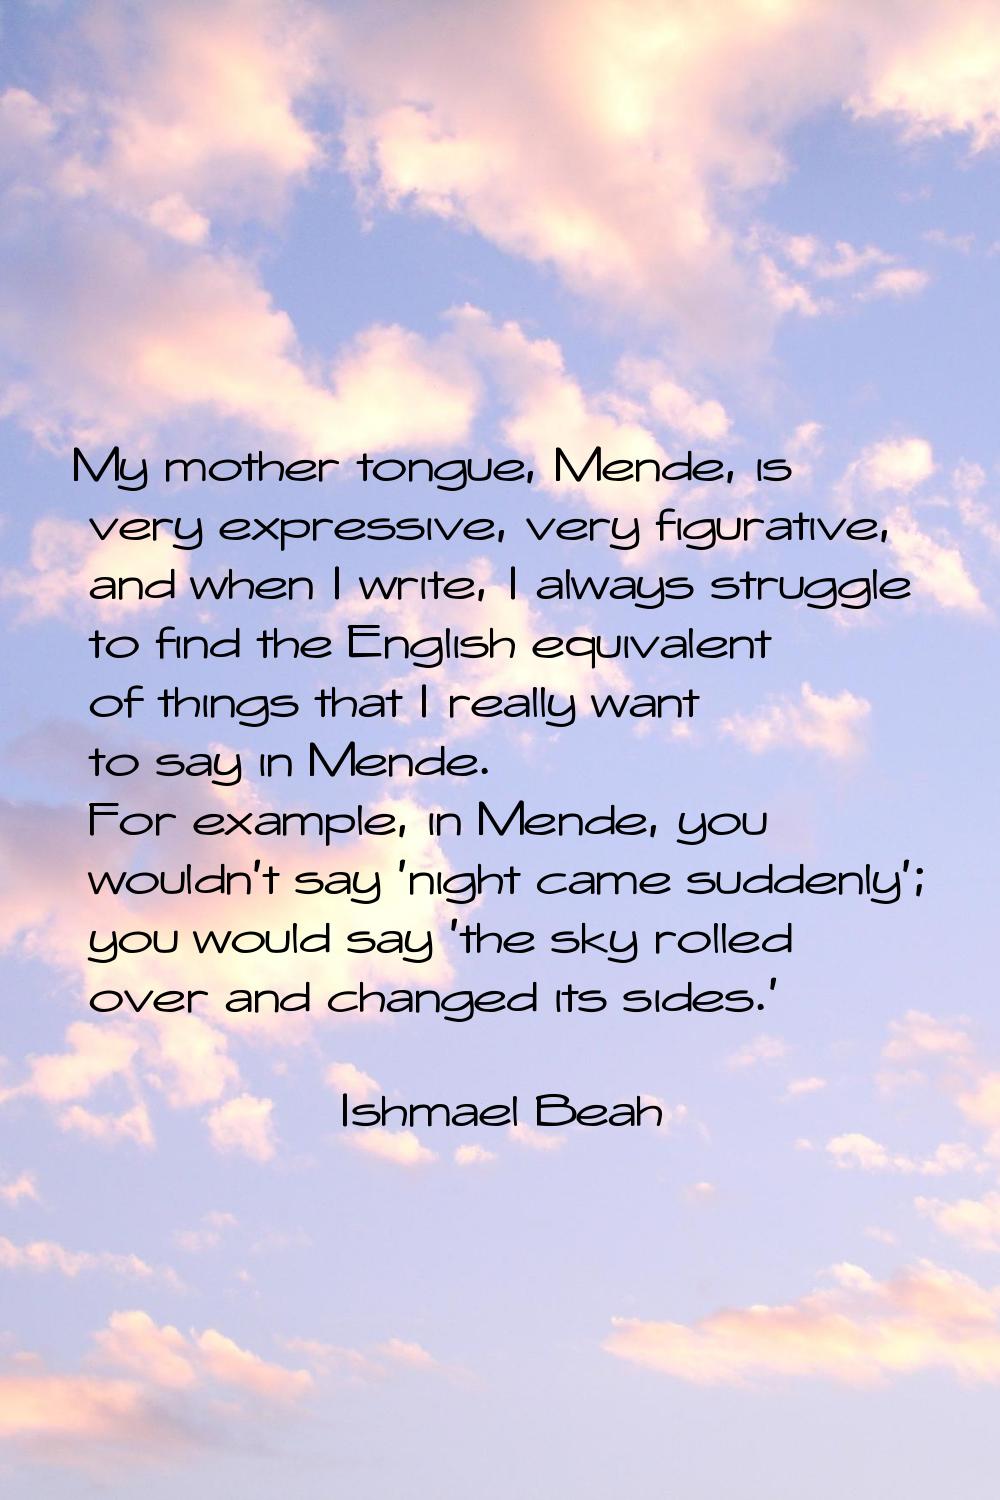 My mother tongue, Mende, is very expressive, very figurative, and when I write, I always struggle t